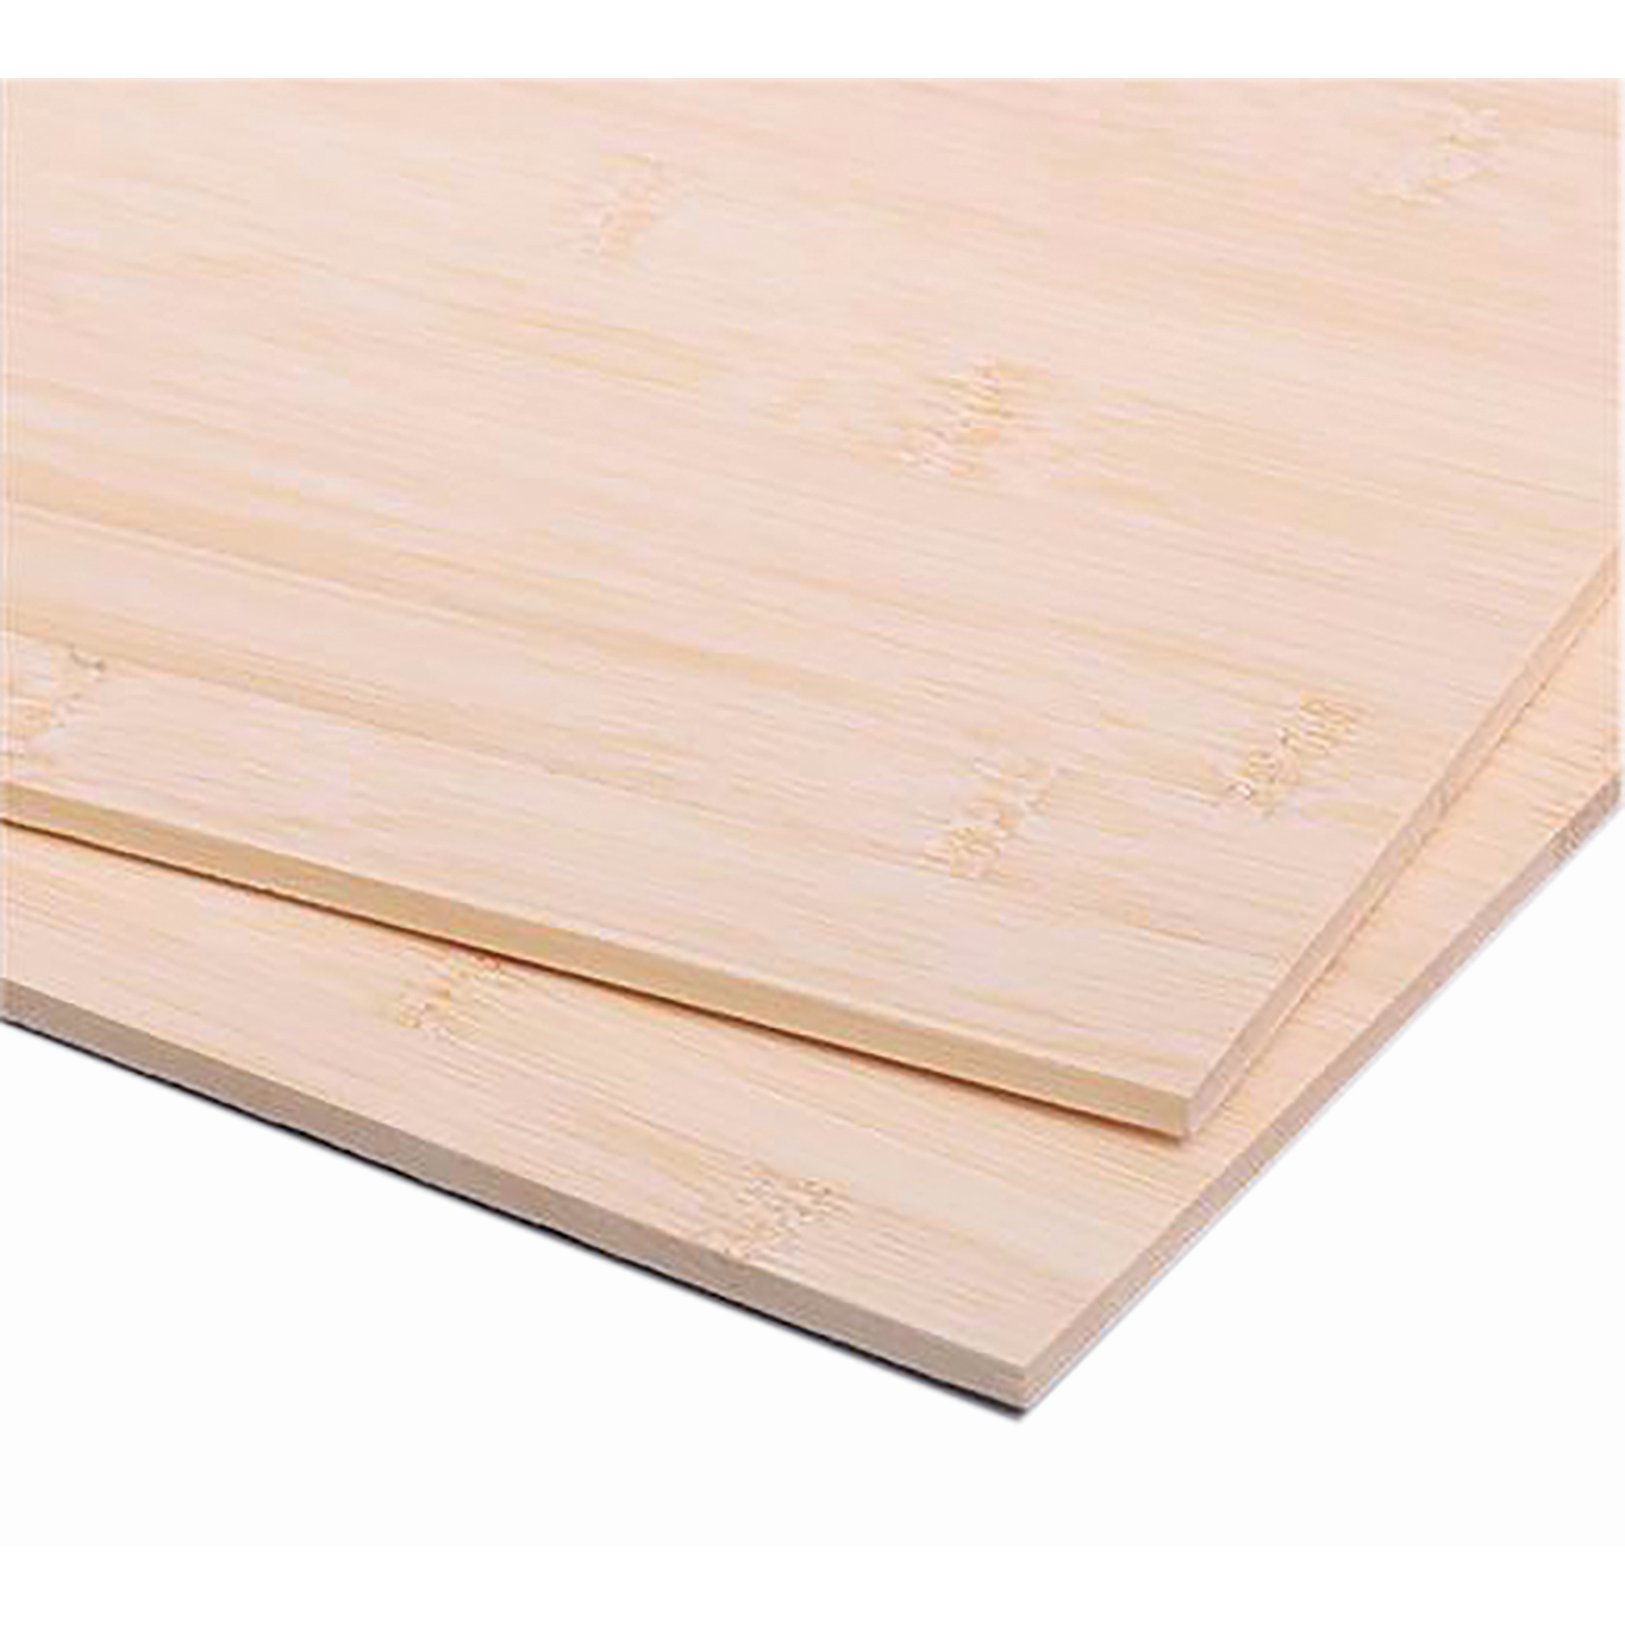 OUT OF STOCK - Bamboo Sheet - 600 x 400 x 3mm (Pack of 5)